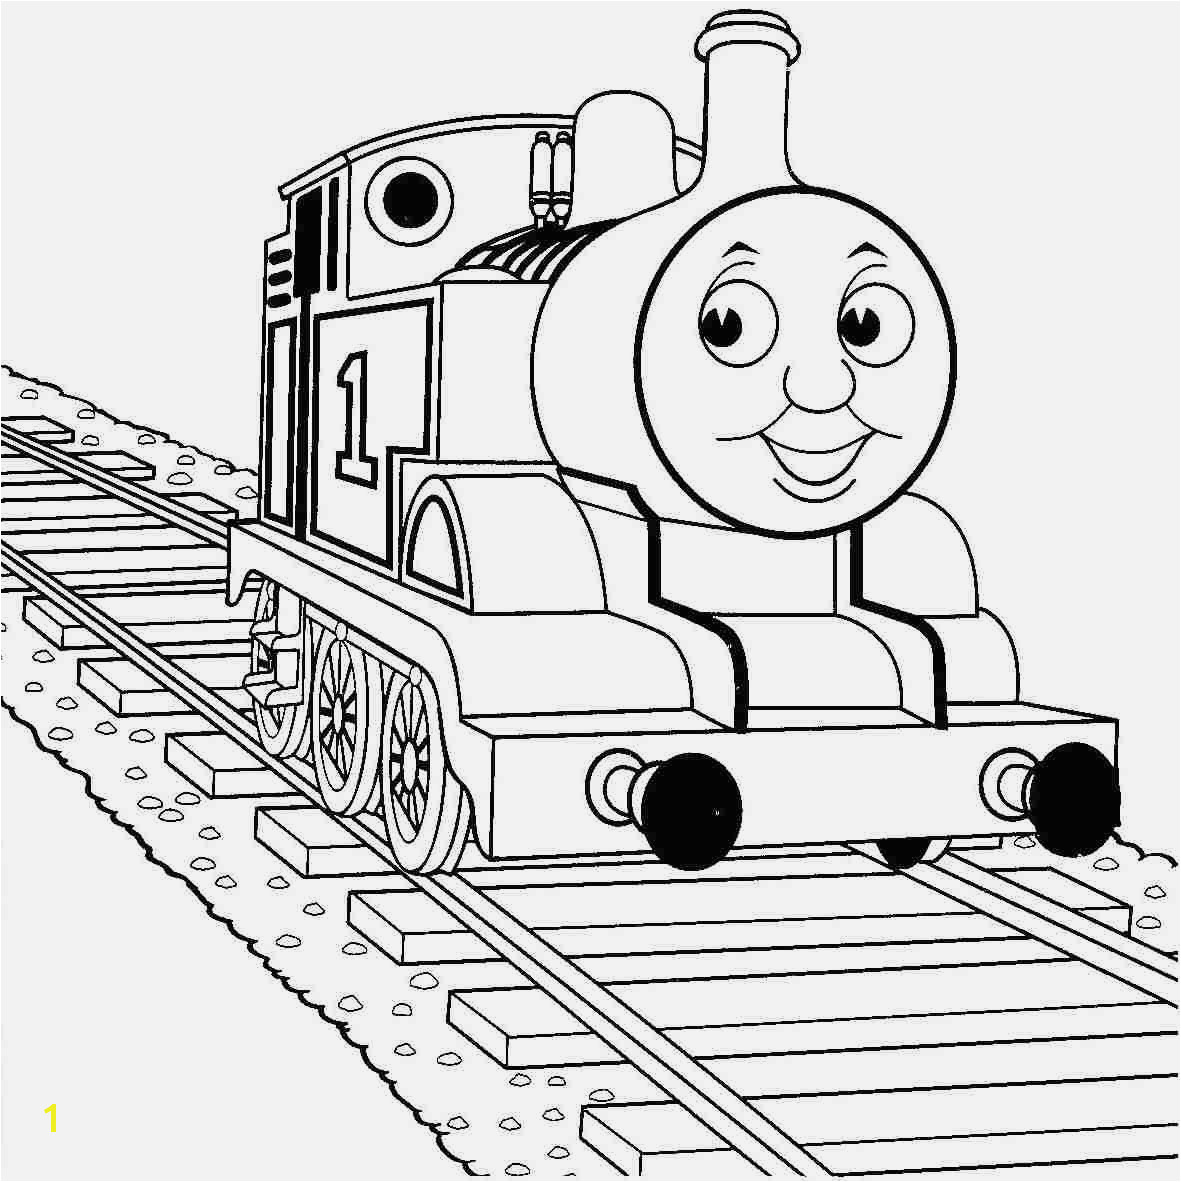 Color Thomas the Train Coloring Pages Thomas the Train Coloring Pages Best Easy 41 Coloring Pages Thomas